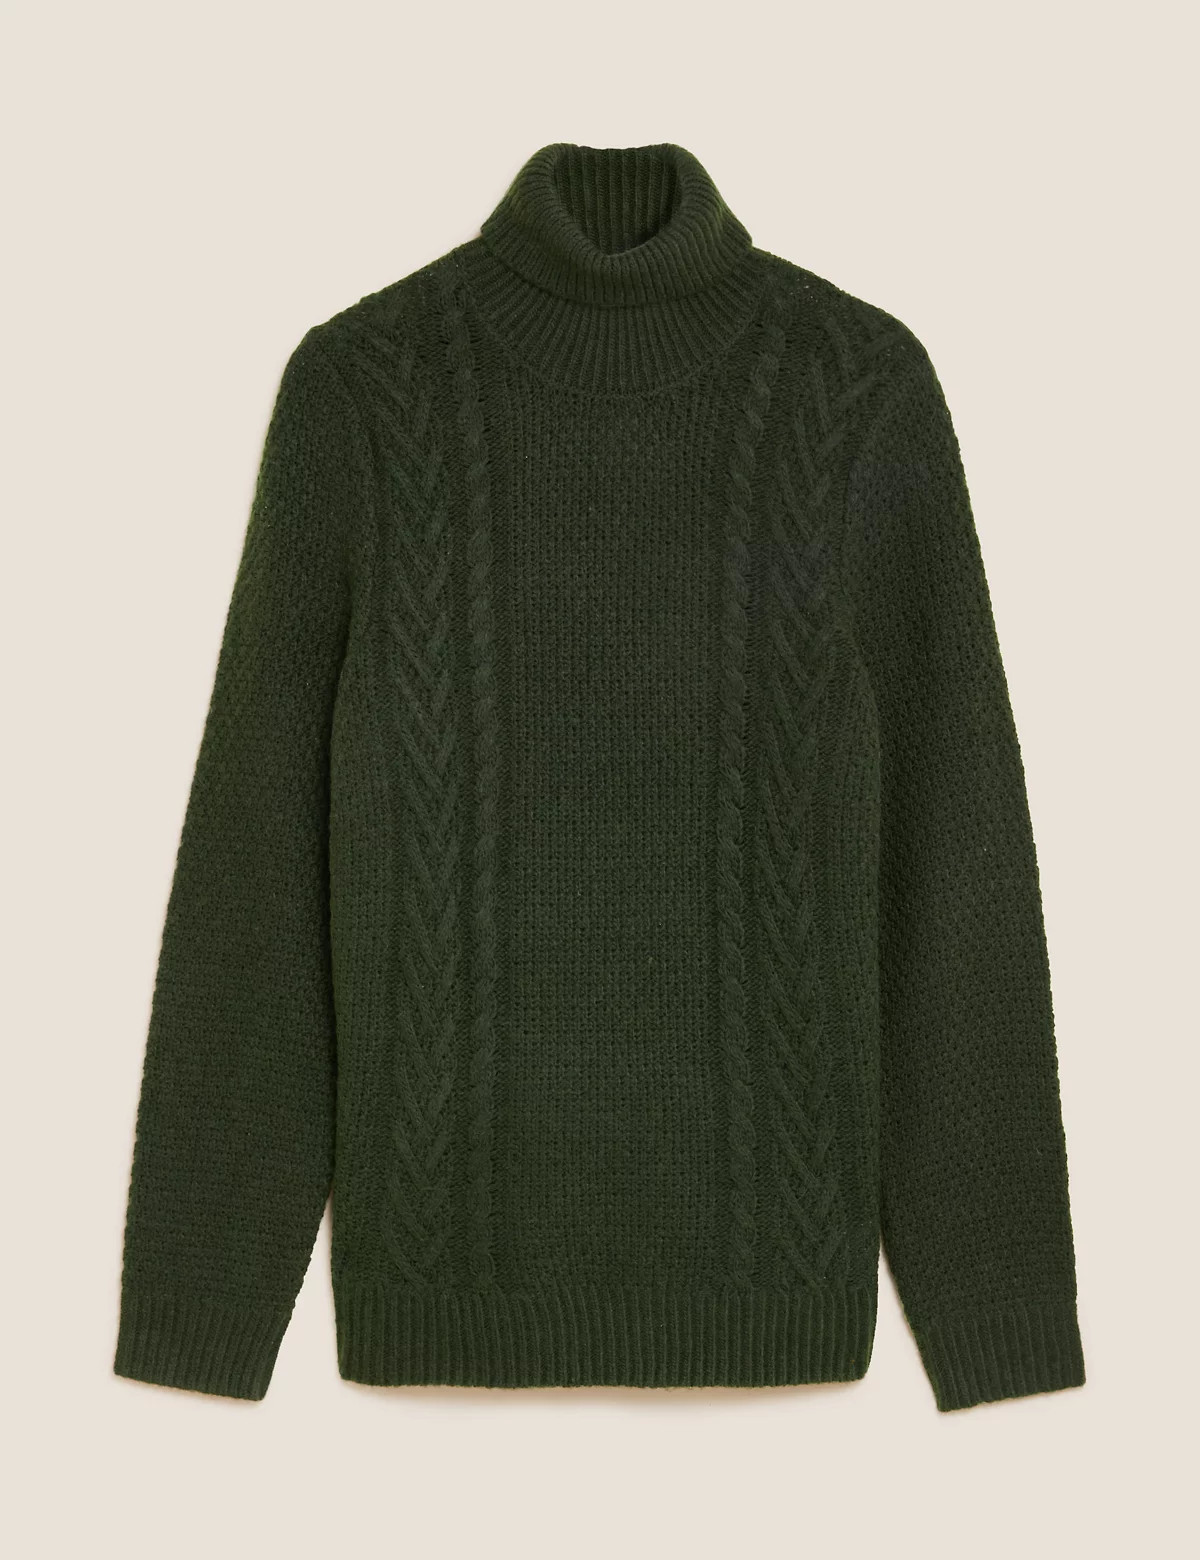 Buy M&S Cable High Neck Jumper with Wool